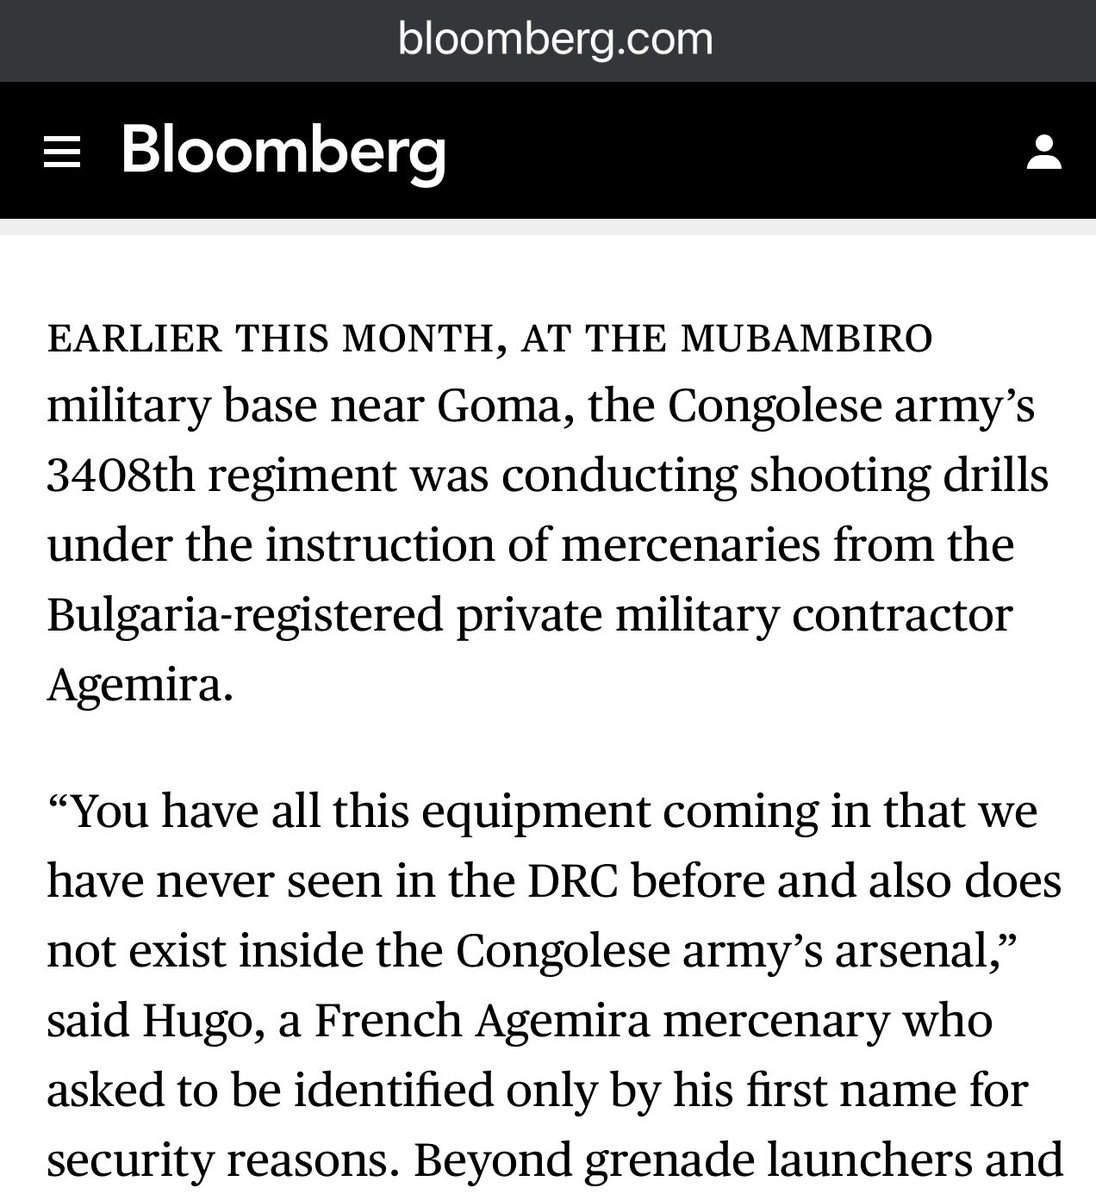 Here is @BloombergAfrica using paid European mercenaries in an active conflict zone as a legitimate news source.